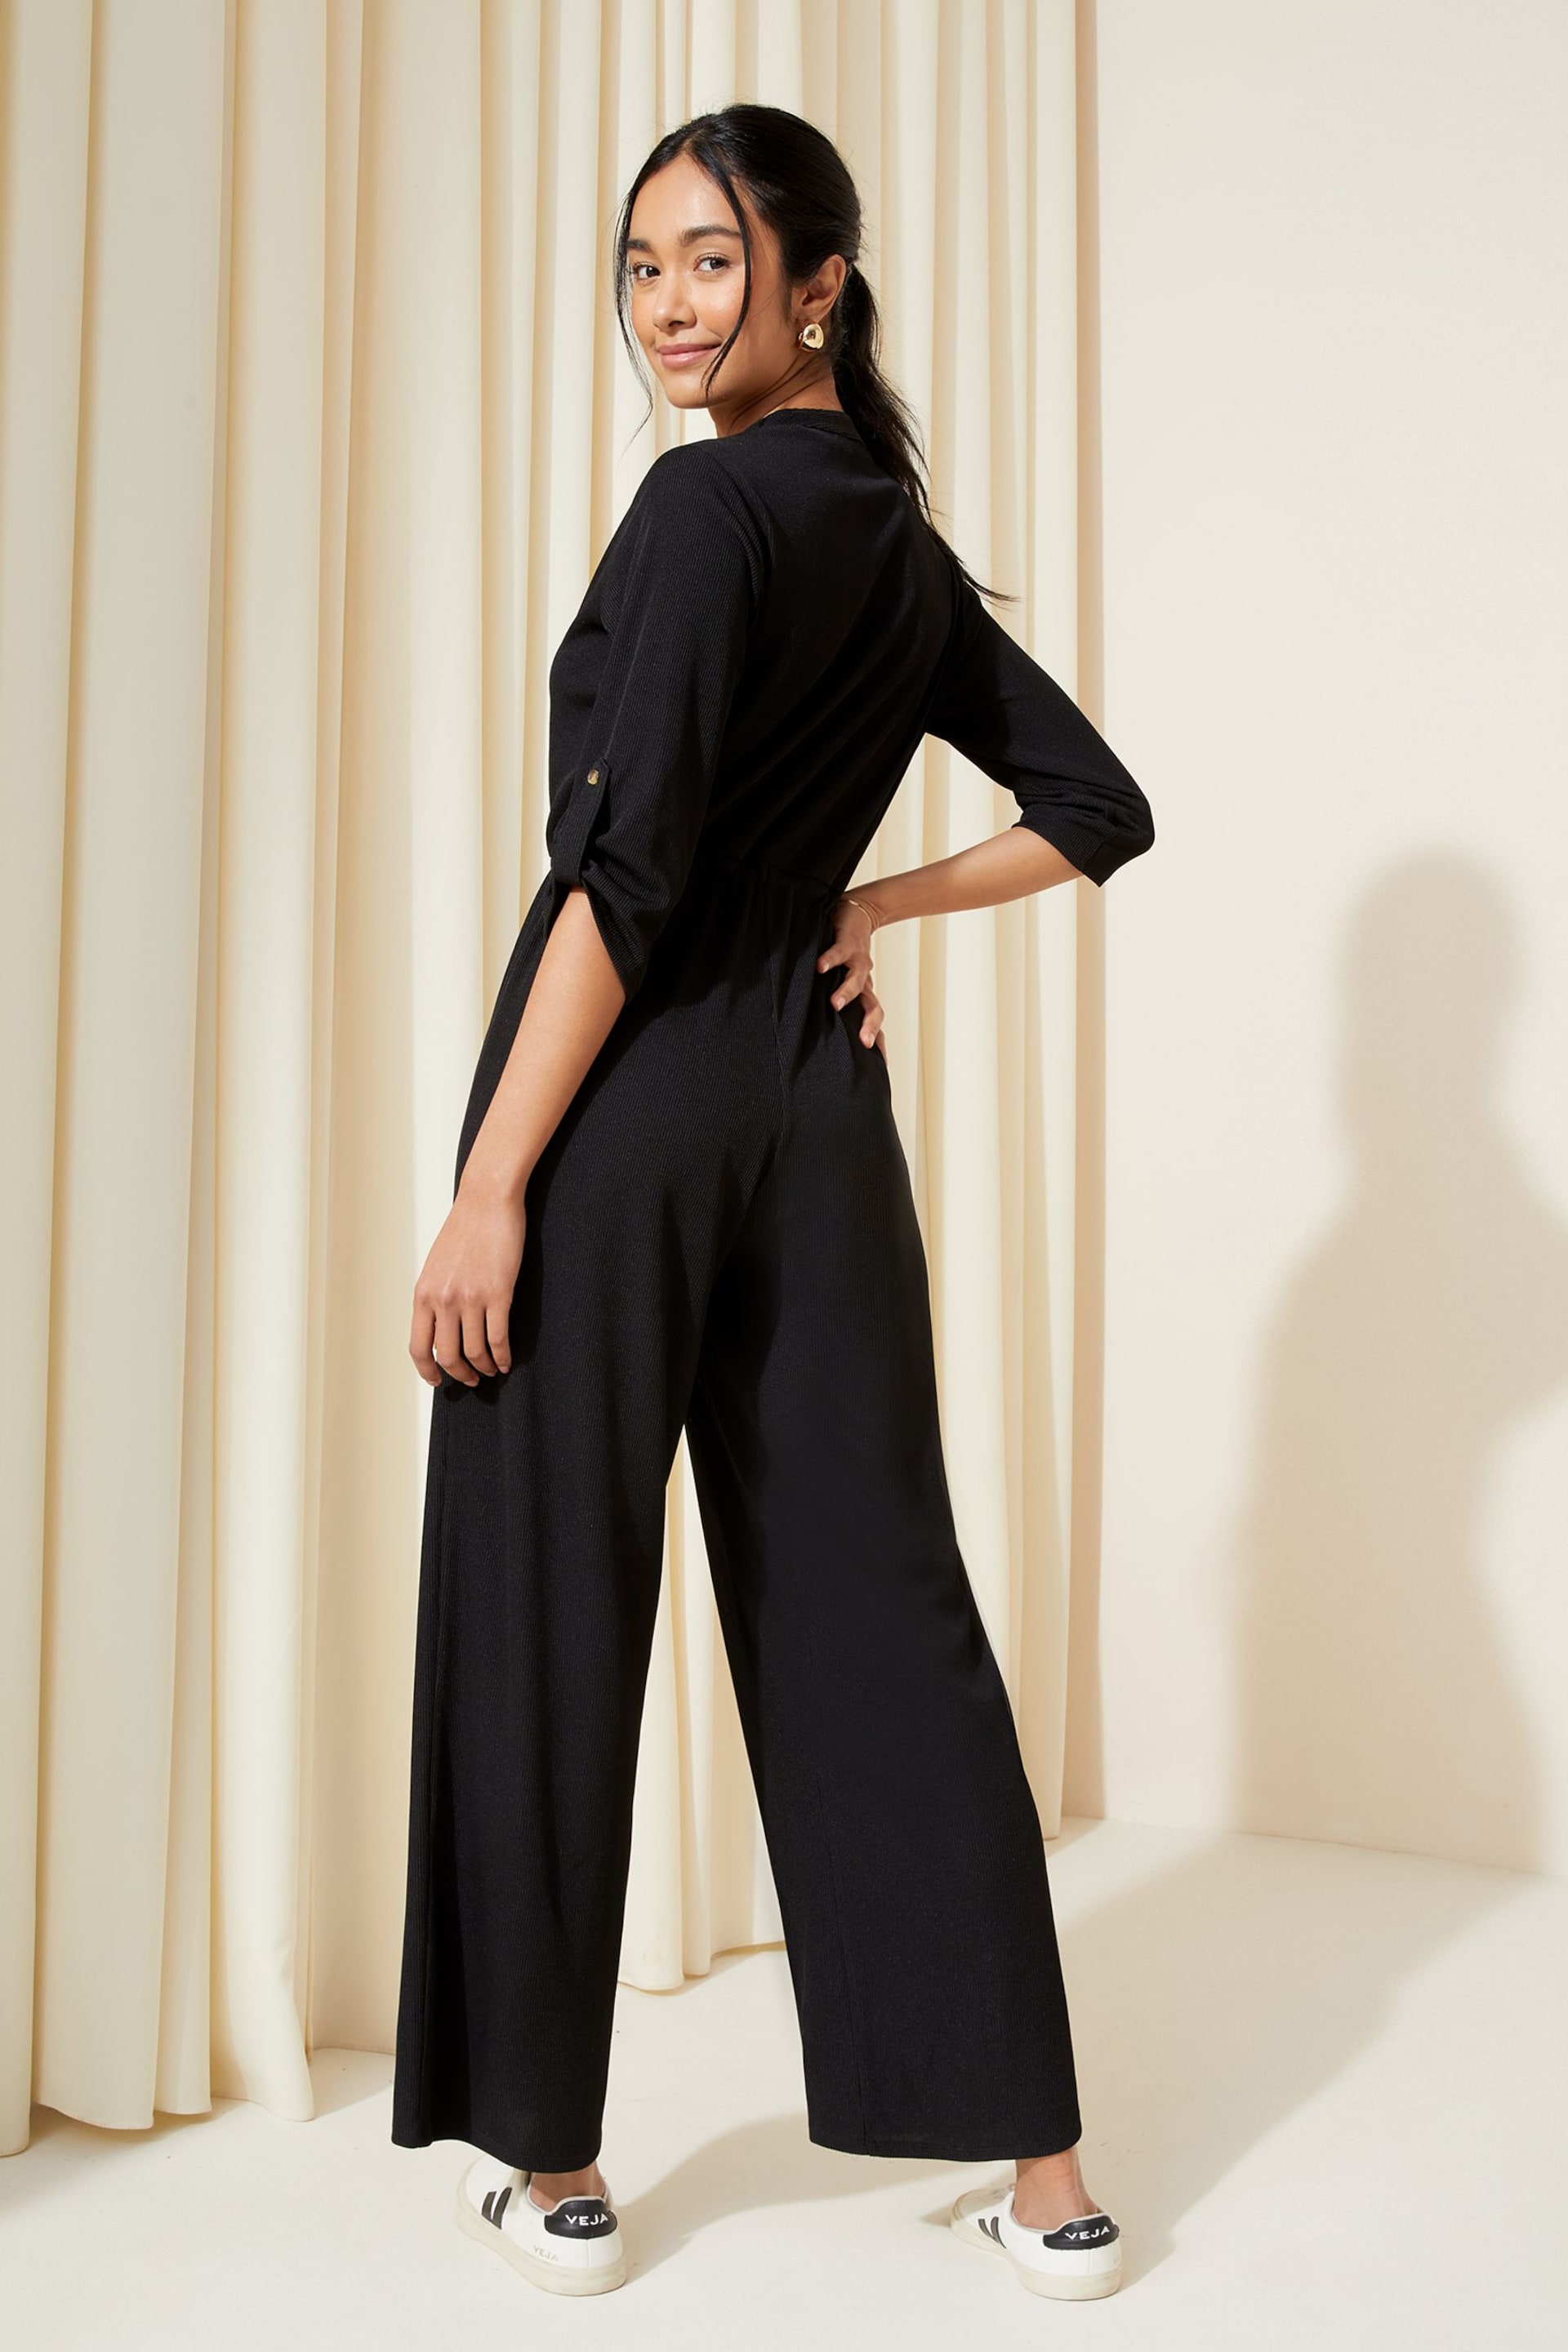 Friends Like These Black Petite Jersey Long Sleeve Cinched Waist Jumpsuit - Image 4 of 4